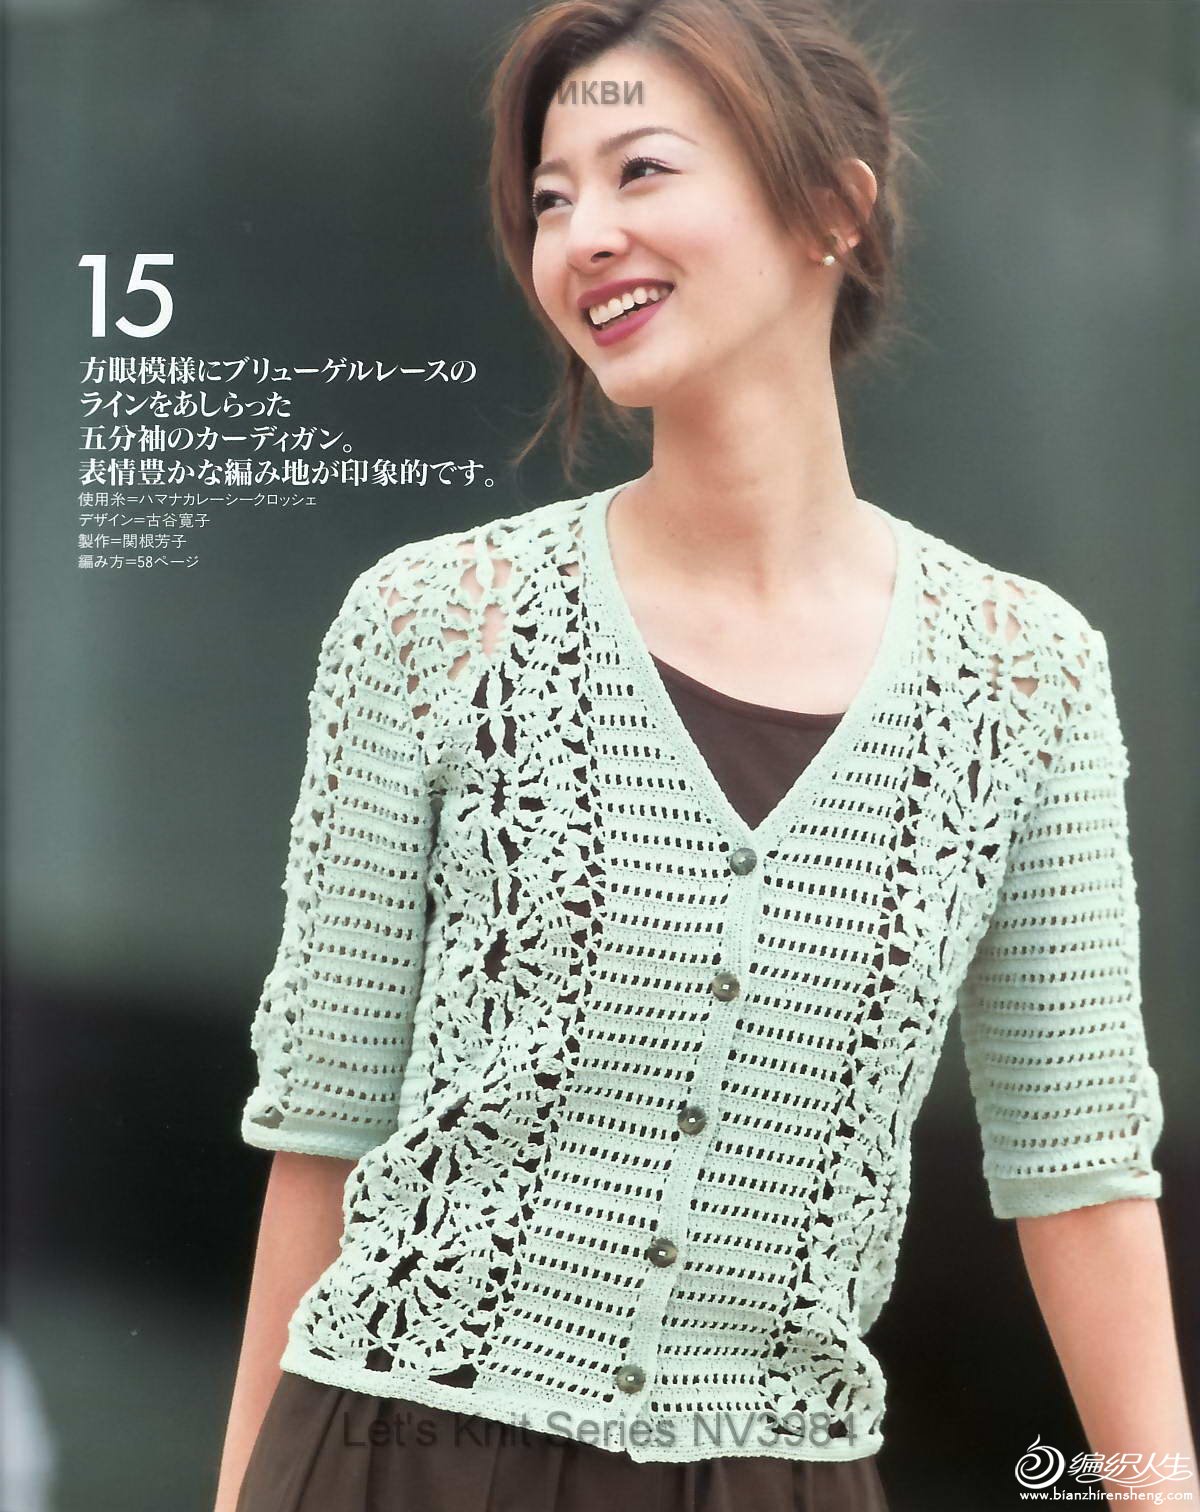 Let's Knit Series NV3984_Page021.JPG